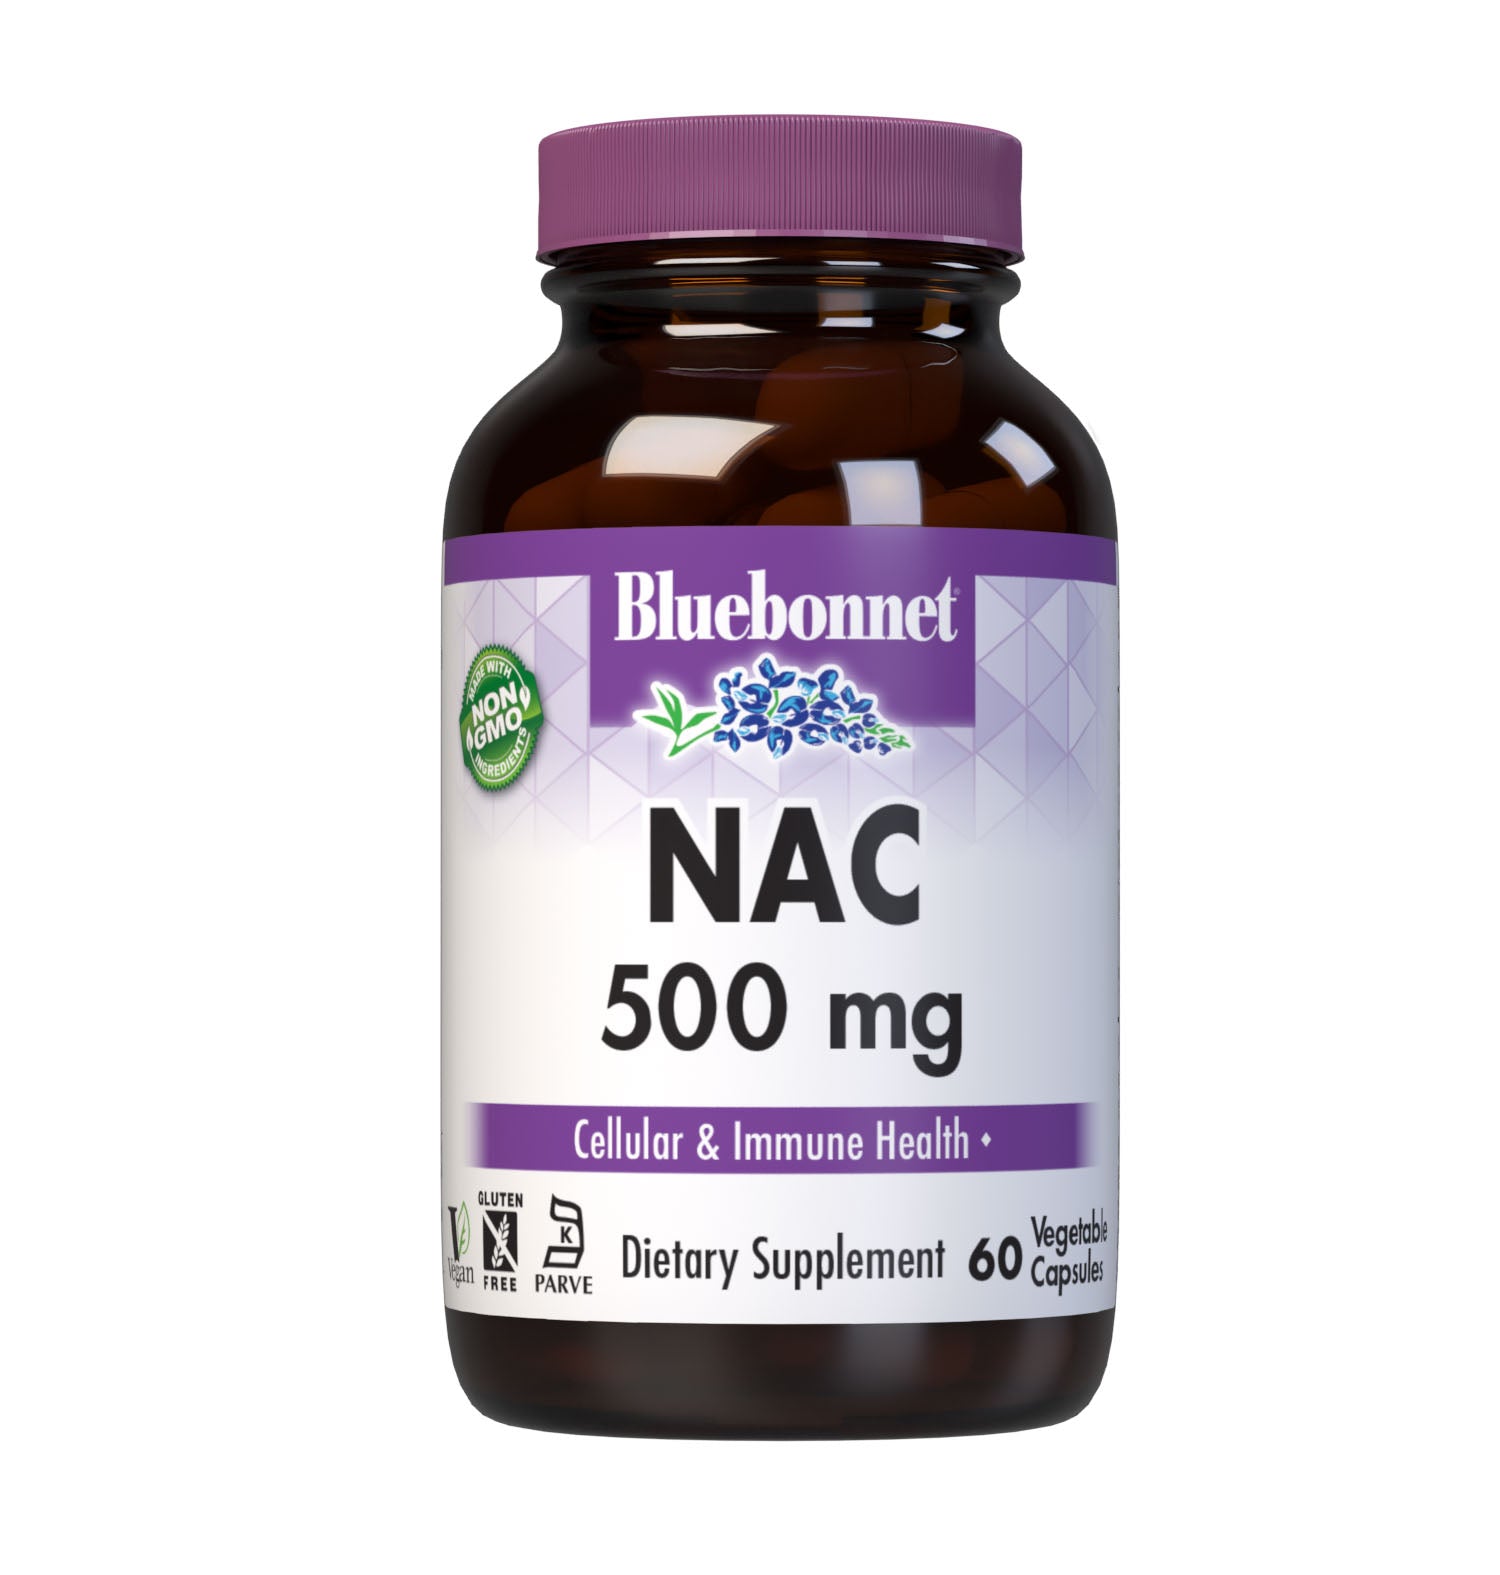 Bluebonnet’s NAC 500 mg 60 vegetable capsules are formulated with the free-form amino acid N-acetyl-cysteine in its crystalline form to help support cellular health and immune function. #size_60 count